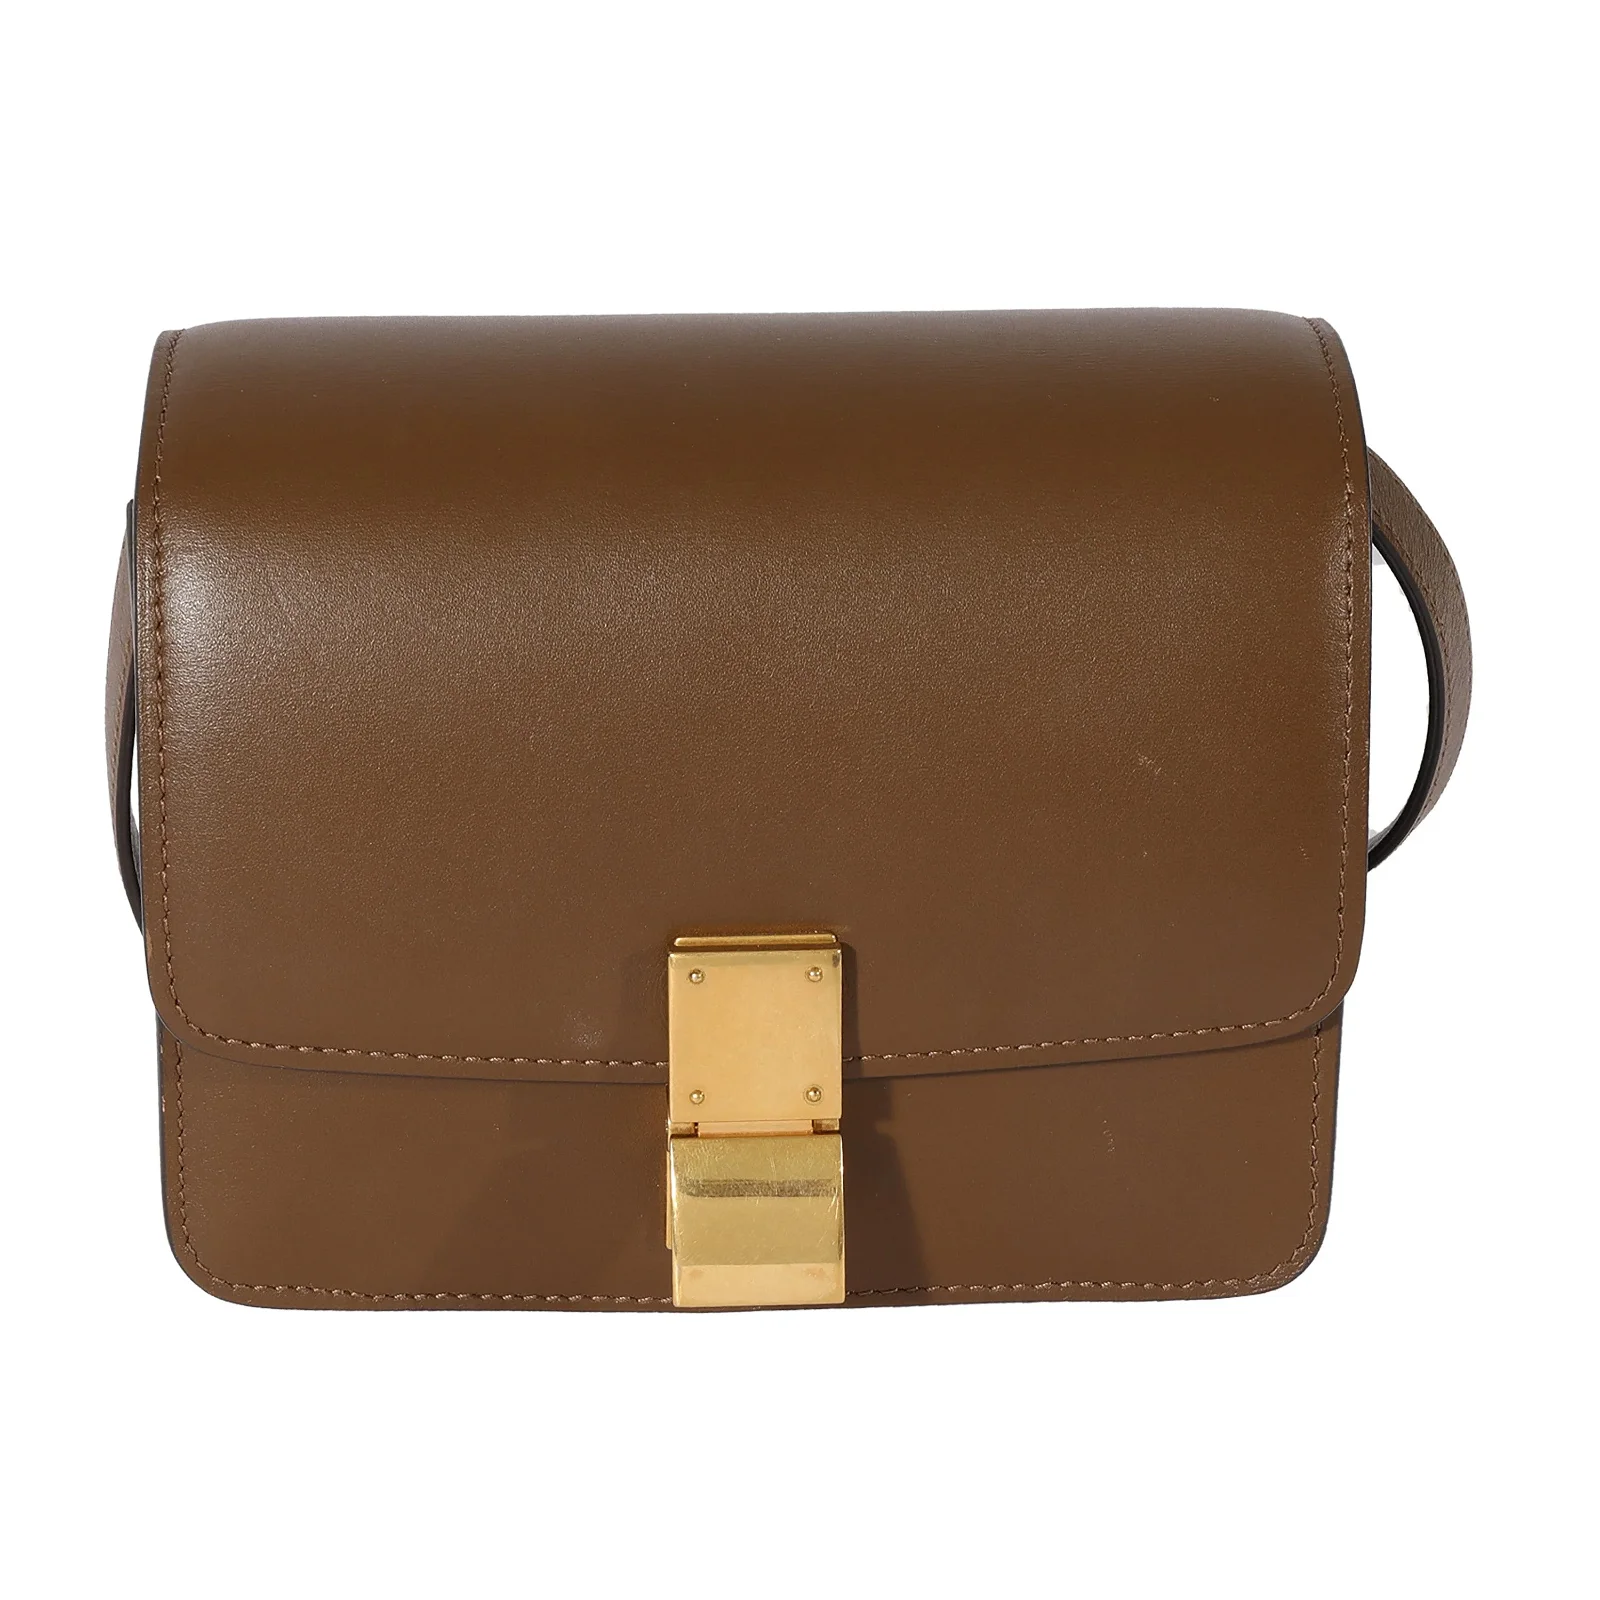 Image of Celine Brown Smooth Leather Small Box Bag